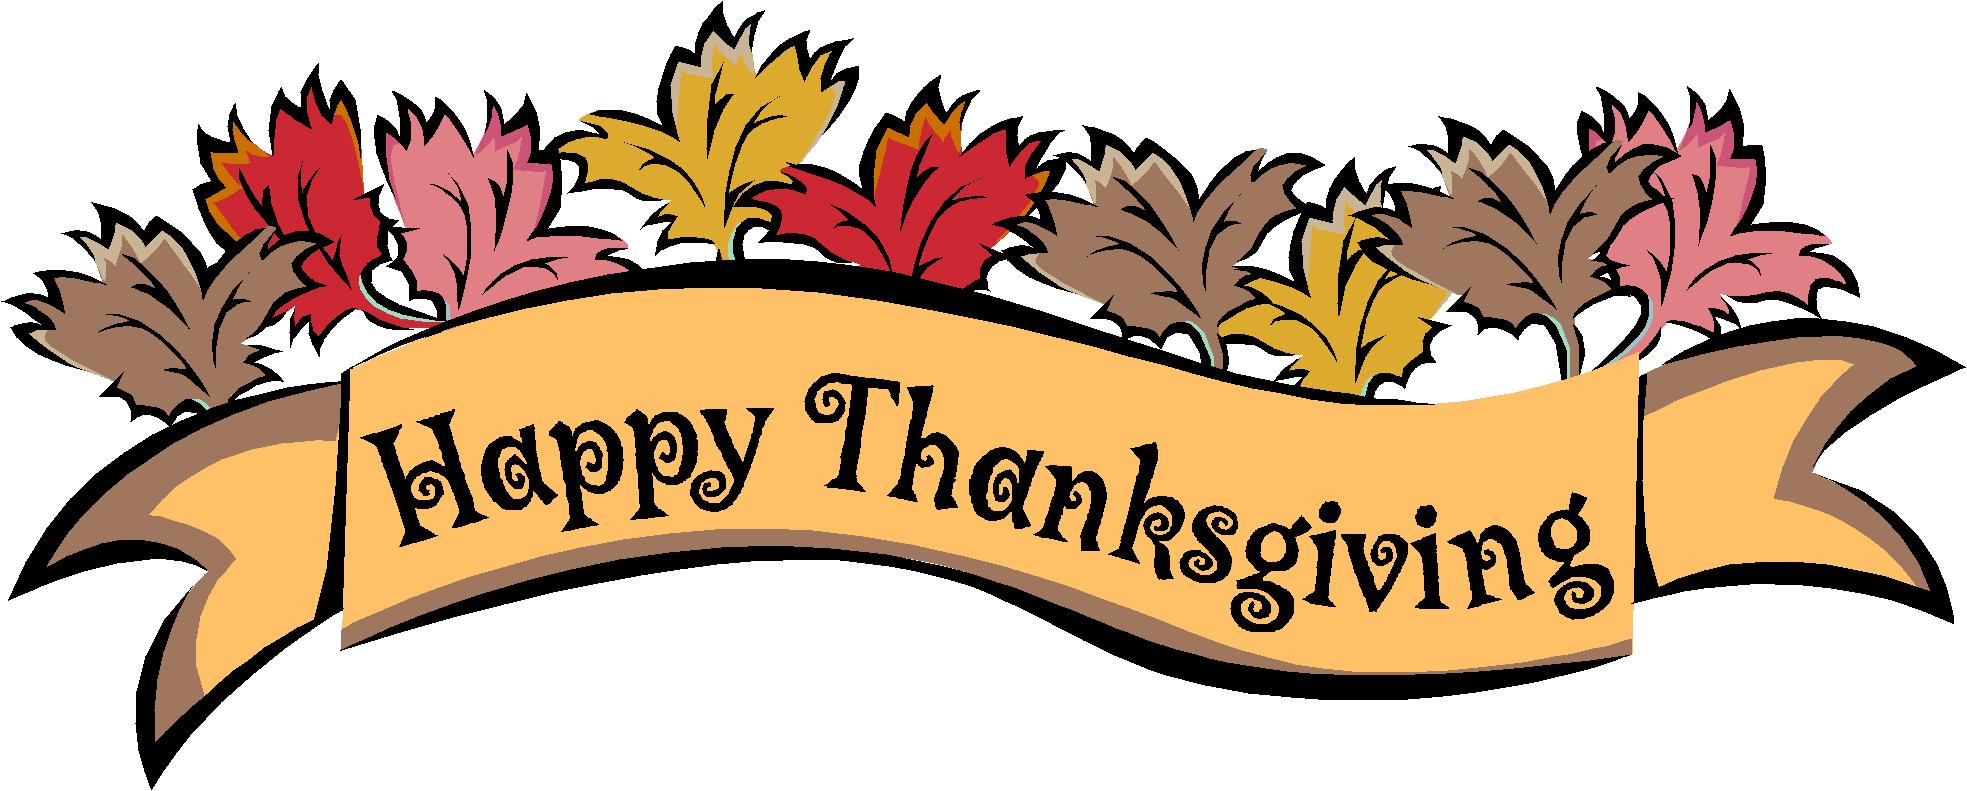 Happy Thanksgiving Banner Clipart.